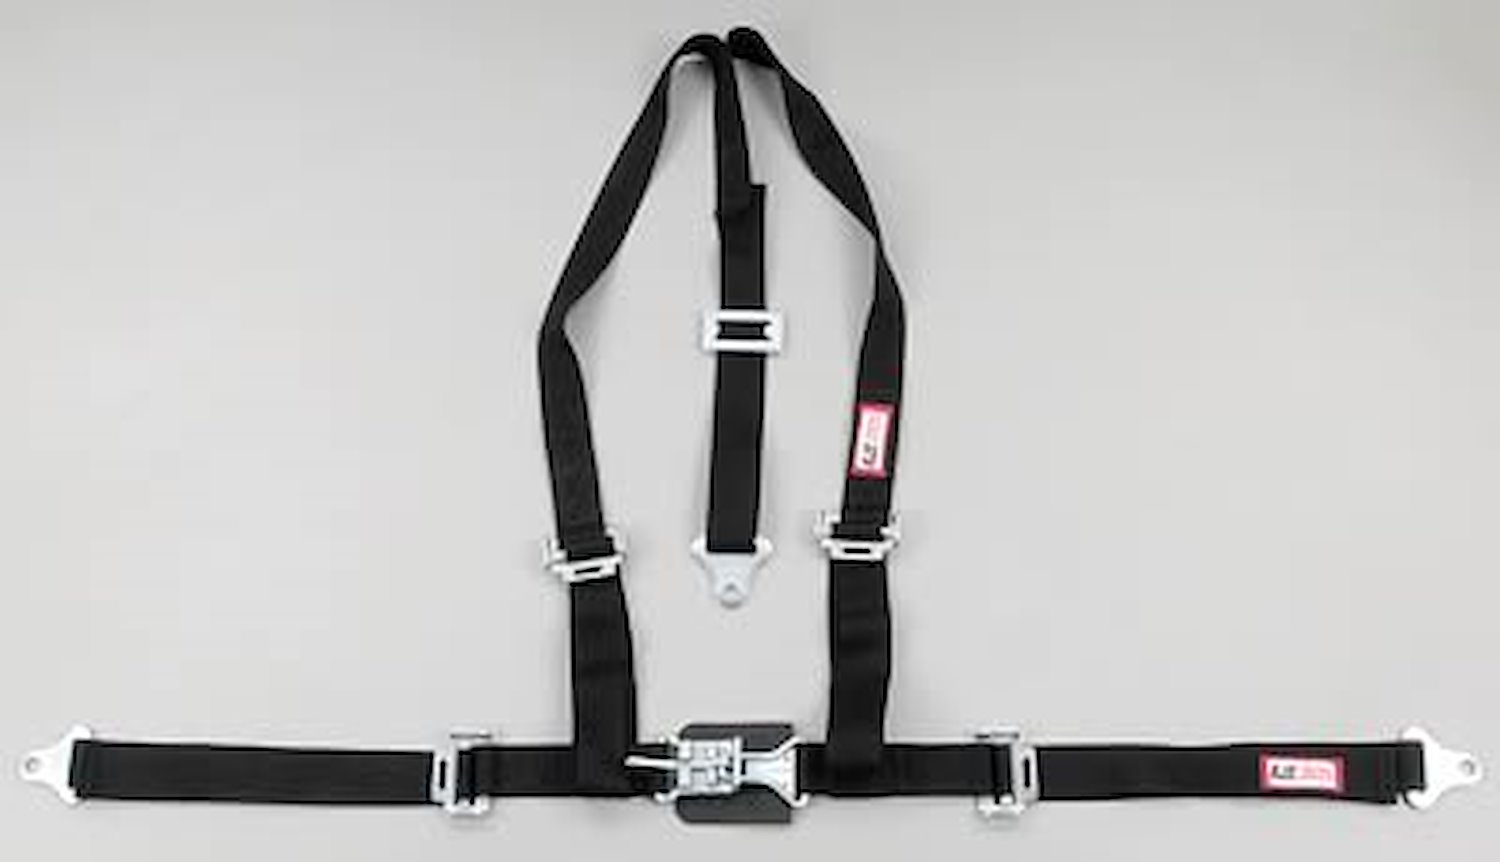 NON-SFI L&L HARNESS 3 PULL UP Lap BELT SNAP SEWN IN 2 S.H. Y FLOOR Mount WRAP/SNAP RED